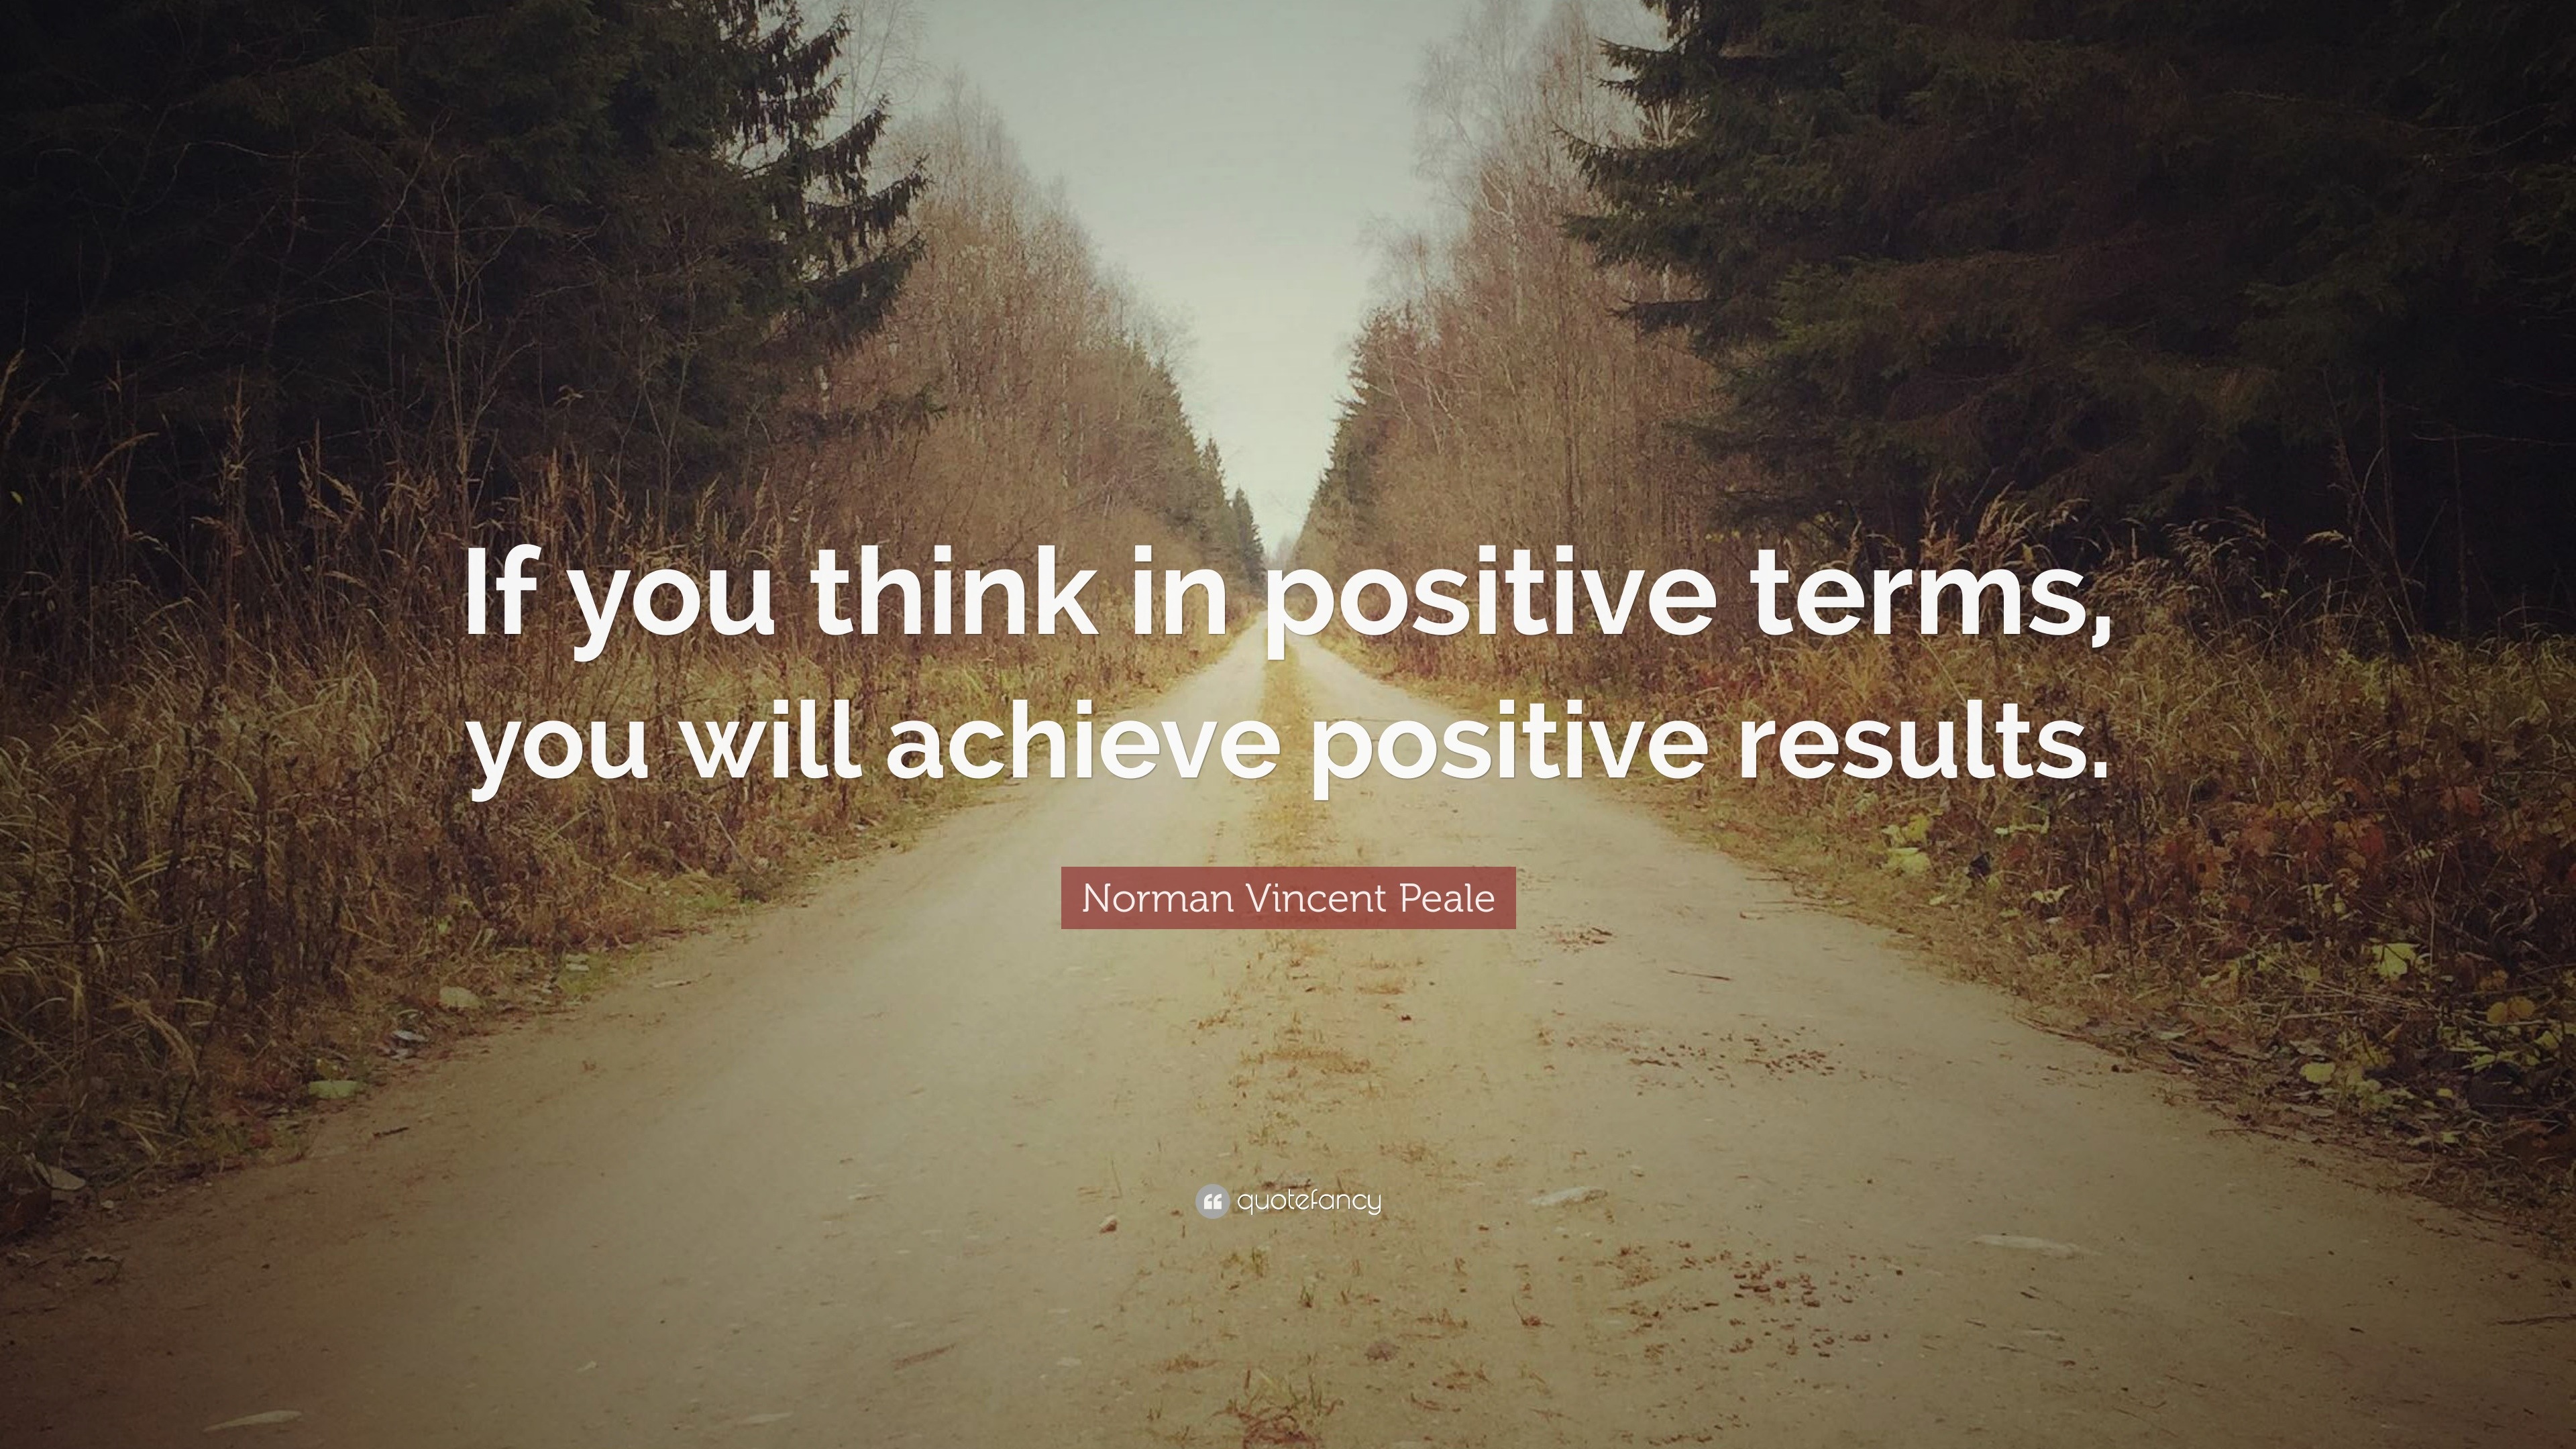 Norman Vincent Peale Quote: “If you think in positive terms, you will ...